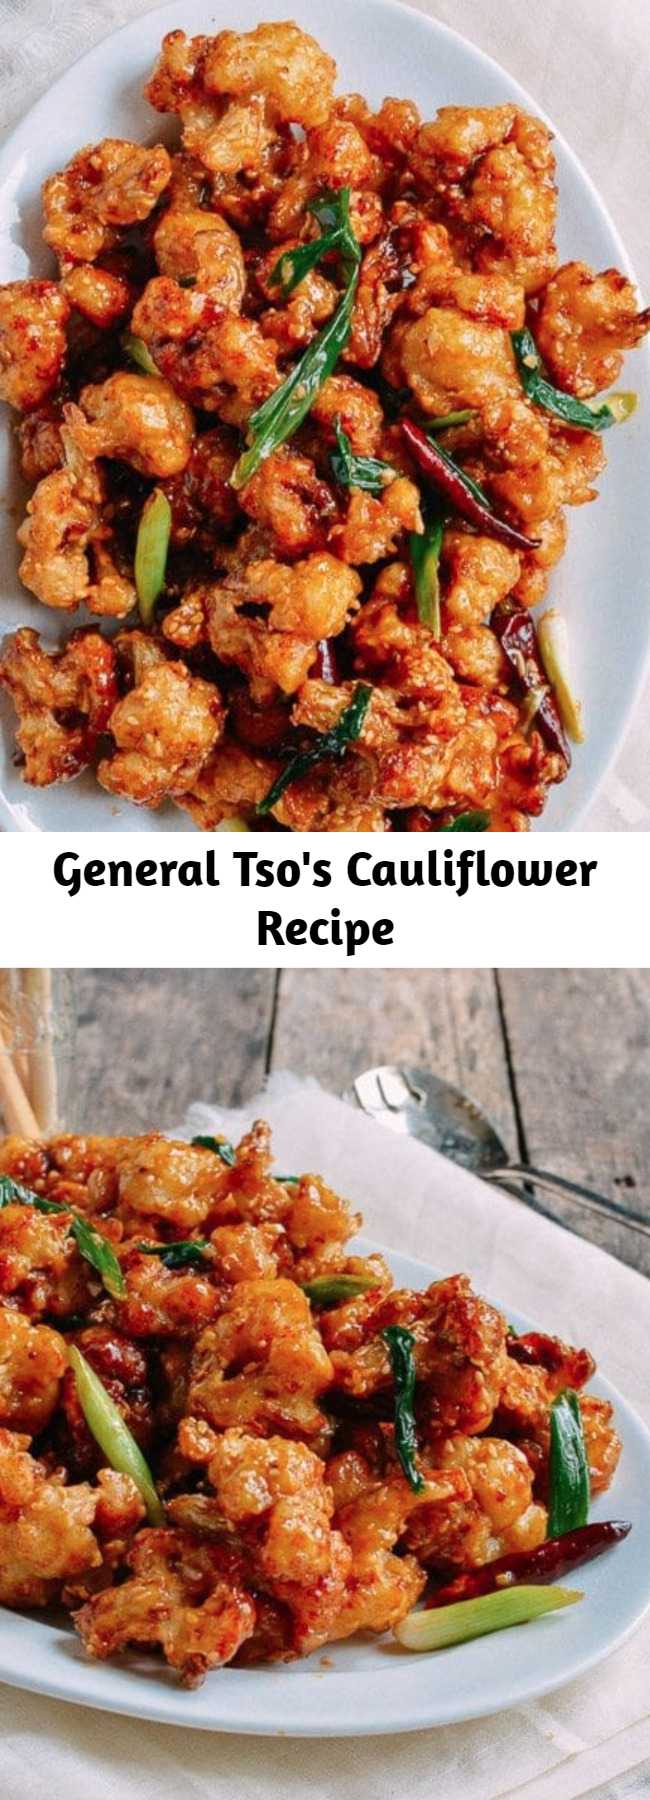 General Tso's Cauliflower Recipe - General Tso's cauliflower is the vegetarian version of the beloved Chinese American dish, General Tso's Chicken. Our General Tso's cauliflower is as good as the original. It’s crispy, super tasty, and might just be better than the chicken version!